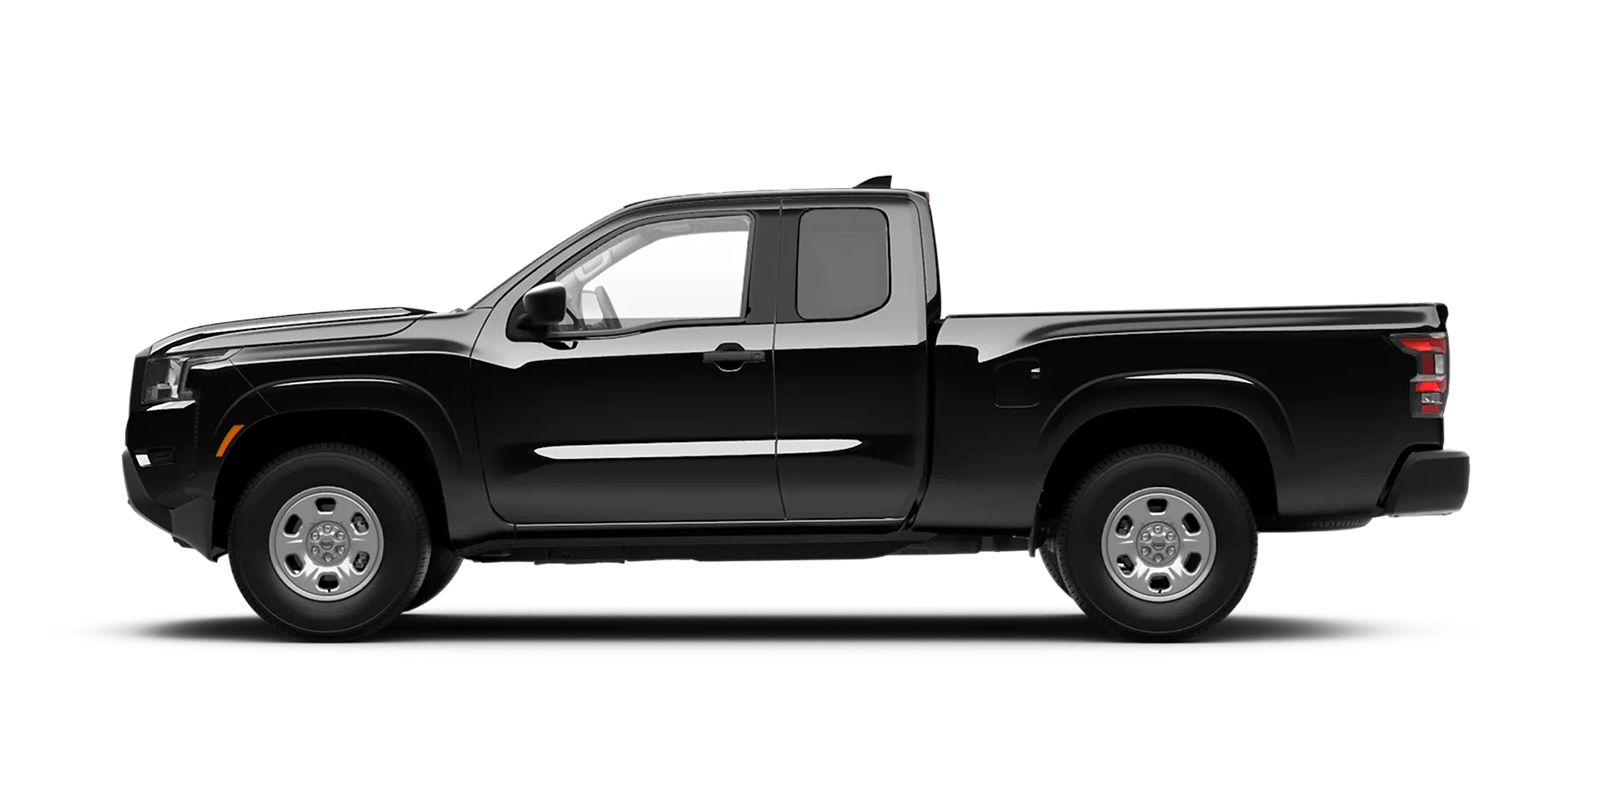 2022 Frontier King Cab S 4x2 in Super Black | Nationwide Nissan in Timonium MD